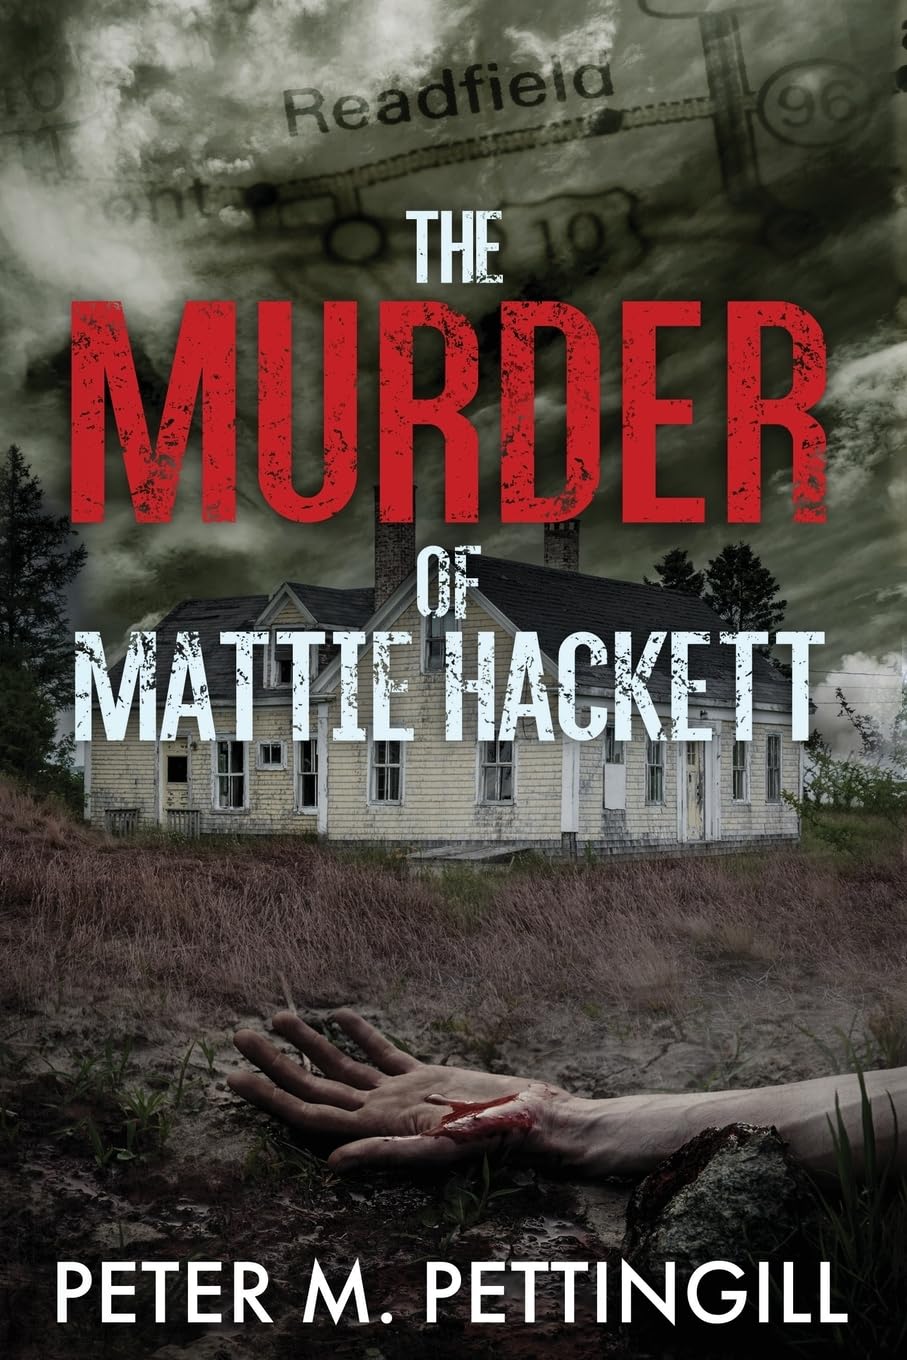 New novel "The Murder of Mattie Hackett" by Peter M. Pettingill is released, the true story of a shocking 1905 murder of a young woman and the ensuing trial seven years later